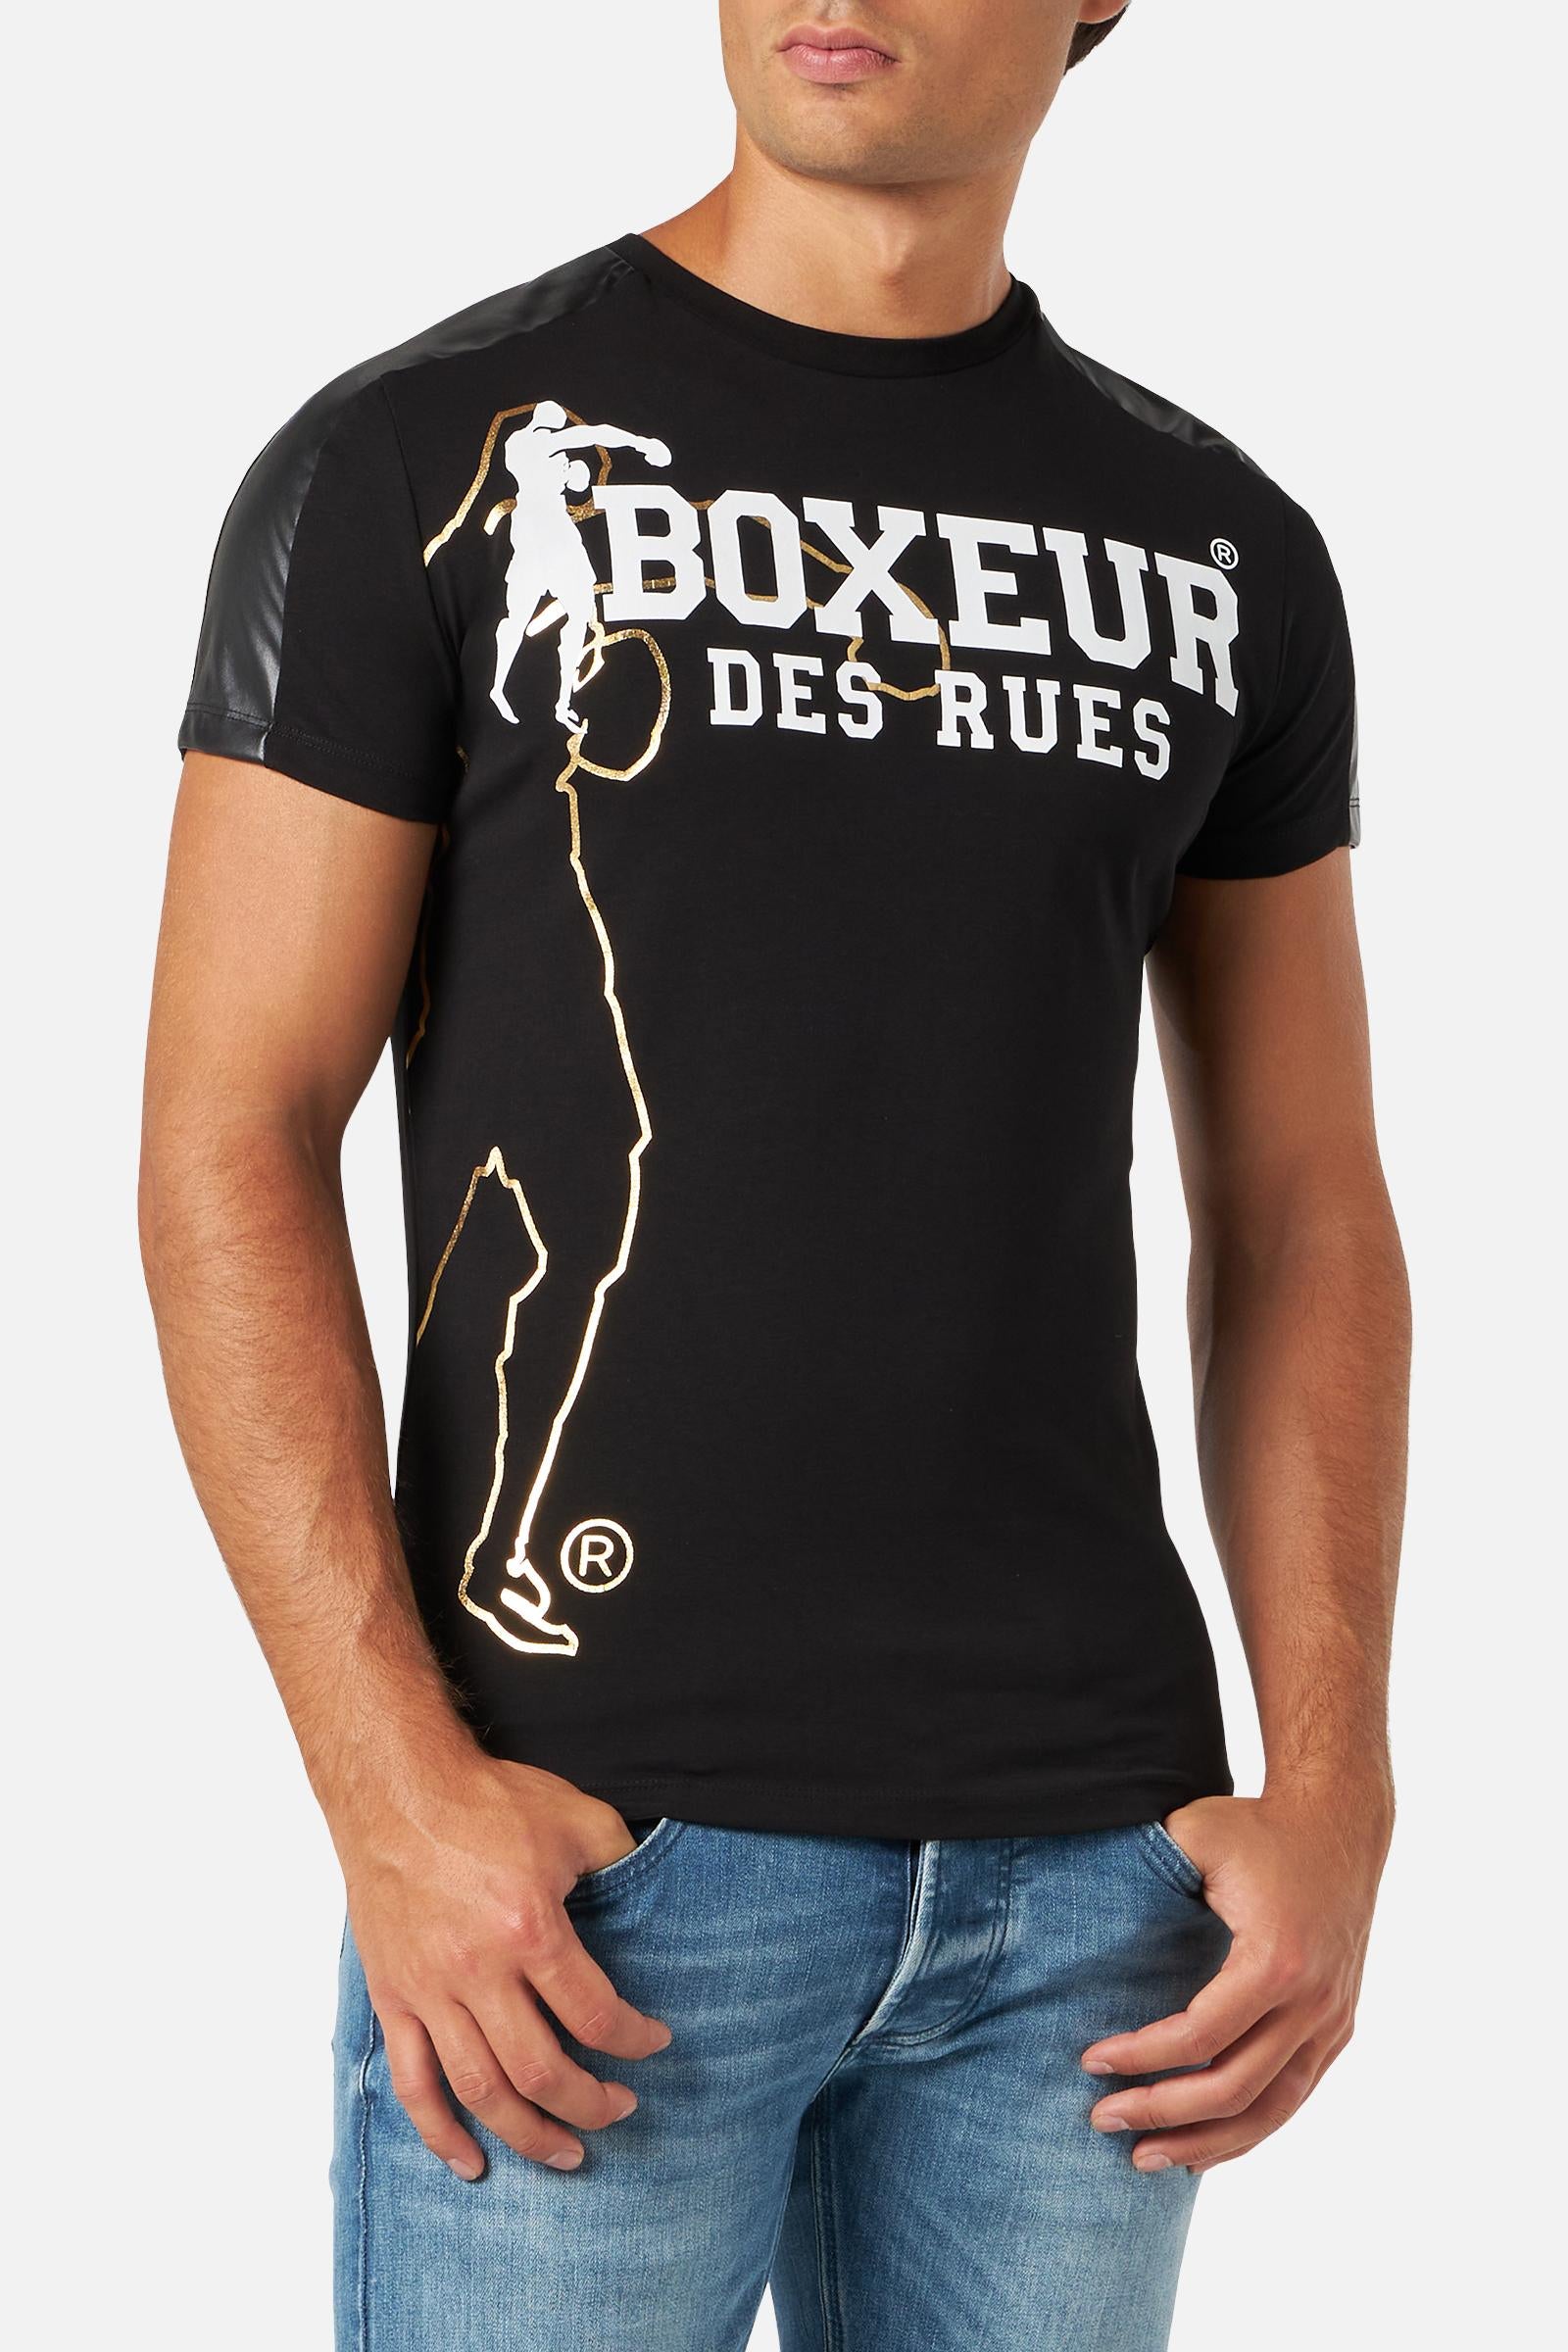 Printed Round Neck T-Shirt in Black-Gold T-Shirts Boxeur des Rues   